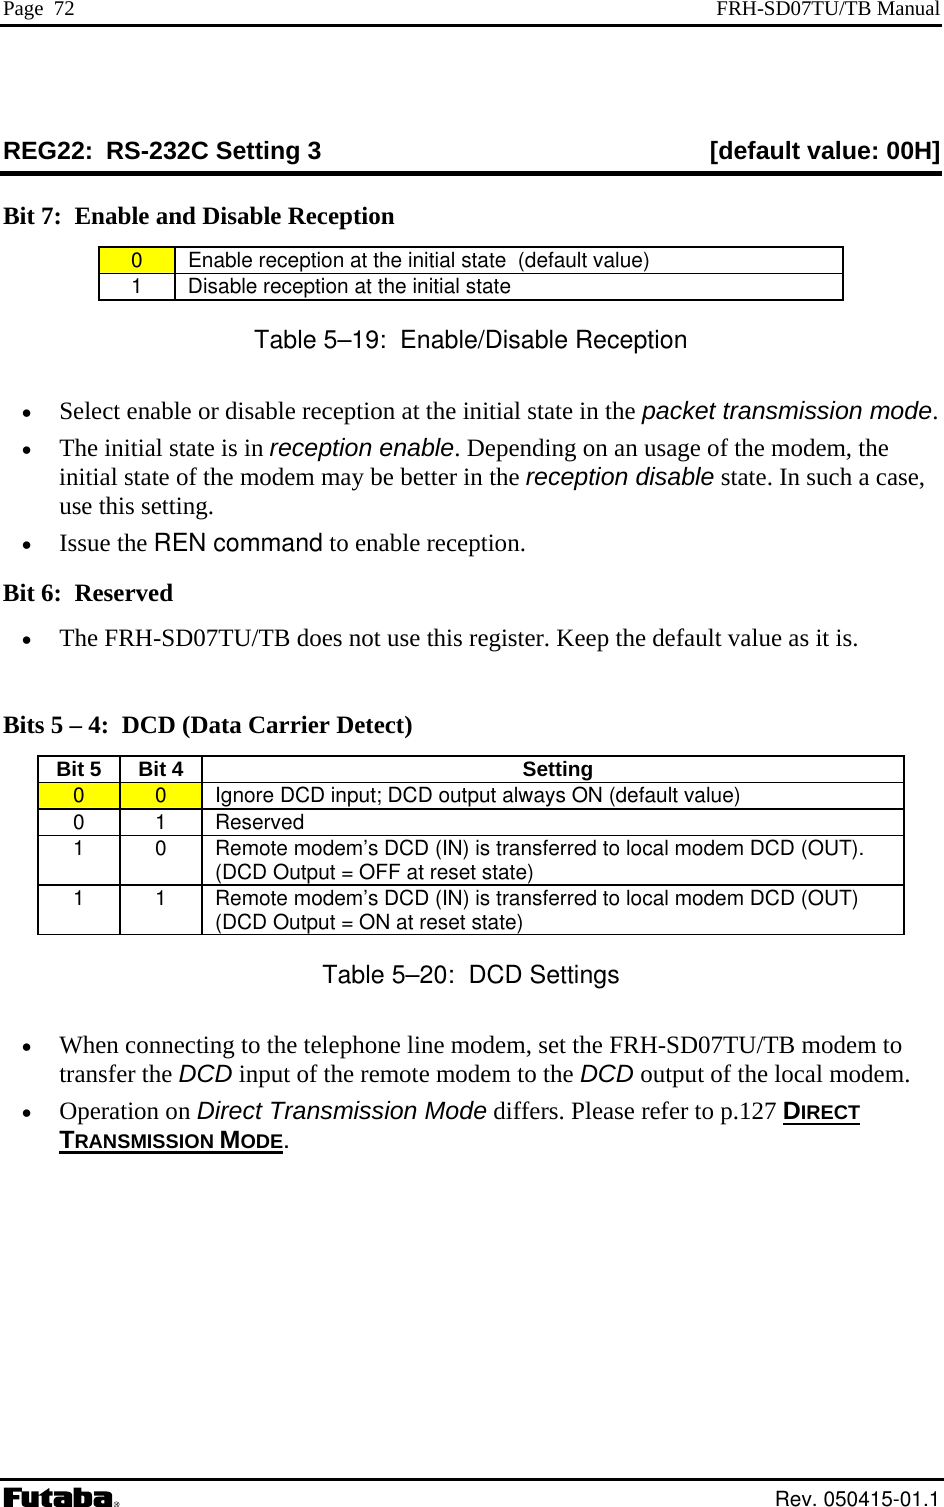 Page  72  FRH-SD07TU/TB Manual REG22:  RS-232C Setting 3  [default value: 00H] Bit 7:  Enable and Disable Reception 0   Enable reception at the initial state  (default value) 1   Disable reception at the initial state  Table 5–19:  Enable/Disable Reception •  Select enable or disable reception at the initial state in the packet transmission mode. •  The initial  odem, the initial state of the modem may be better in the reception disable state. In such a case, •  and to enable reception. Bit 6 default value as it is. B  5Bit 5  Bit 4    Setting state is in reception enable. Depending on an usage of the muse this setting. Issue the REN comm:  Reserved •  The FRH-SD07TU/TB does not use this register. Keep the its  – 4:  DCD (Data Carrier Detect) 0  0   Ignore DCD input; DCD output always ON (default value) 0 1  Reserved 1  0   Remote modem’s DCD (IN) is transferred to local modem DCD (OUT). (DCD Output = OFF at reset state) 1  1   Remote modem’s DCD (IN) is transferred to local modem DCD (OUT) (DCD Output = ON at reset state) Table 5–20:  DCD Settings •  When connecting to the telephone line modem, set the FRH-SD07TU/TB modem to transfer the DCD input of the remote modem to the DCD output of the local modem. •  Operation on Direct Transmission Mode differs. Please refer to p.127 DIRECT TRANSMISSION MODE.  Rev. 050415-01.1 